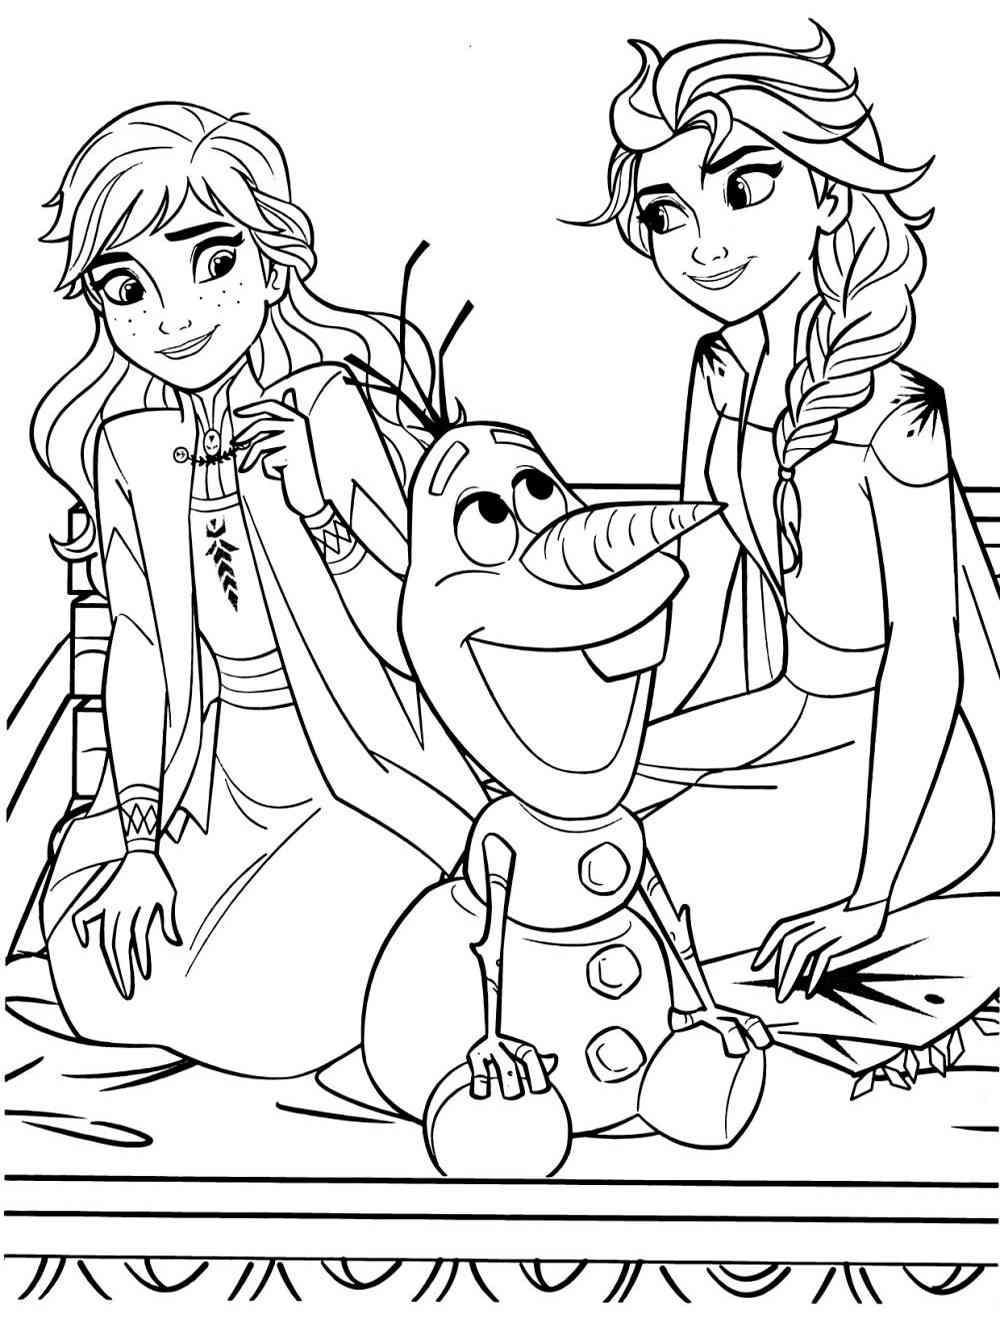 Elsa and Anna 2 coloring page